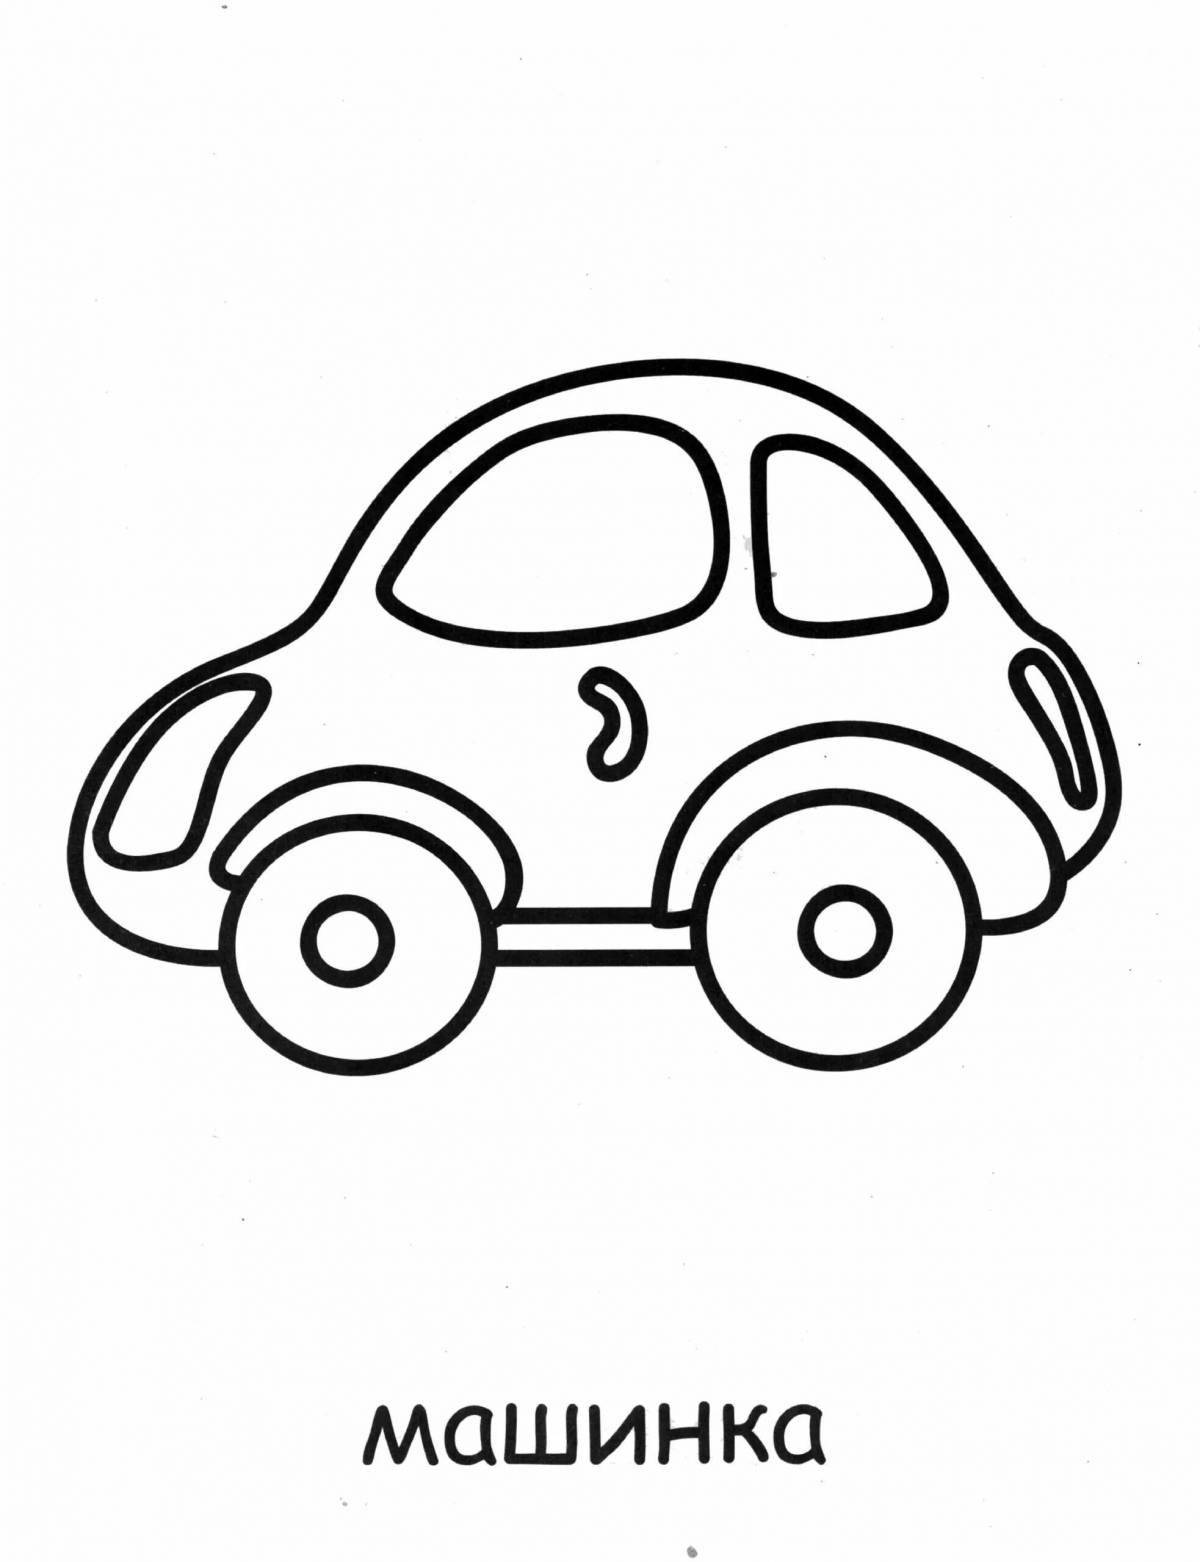 Adorable car coloring book for little ones